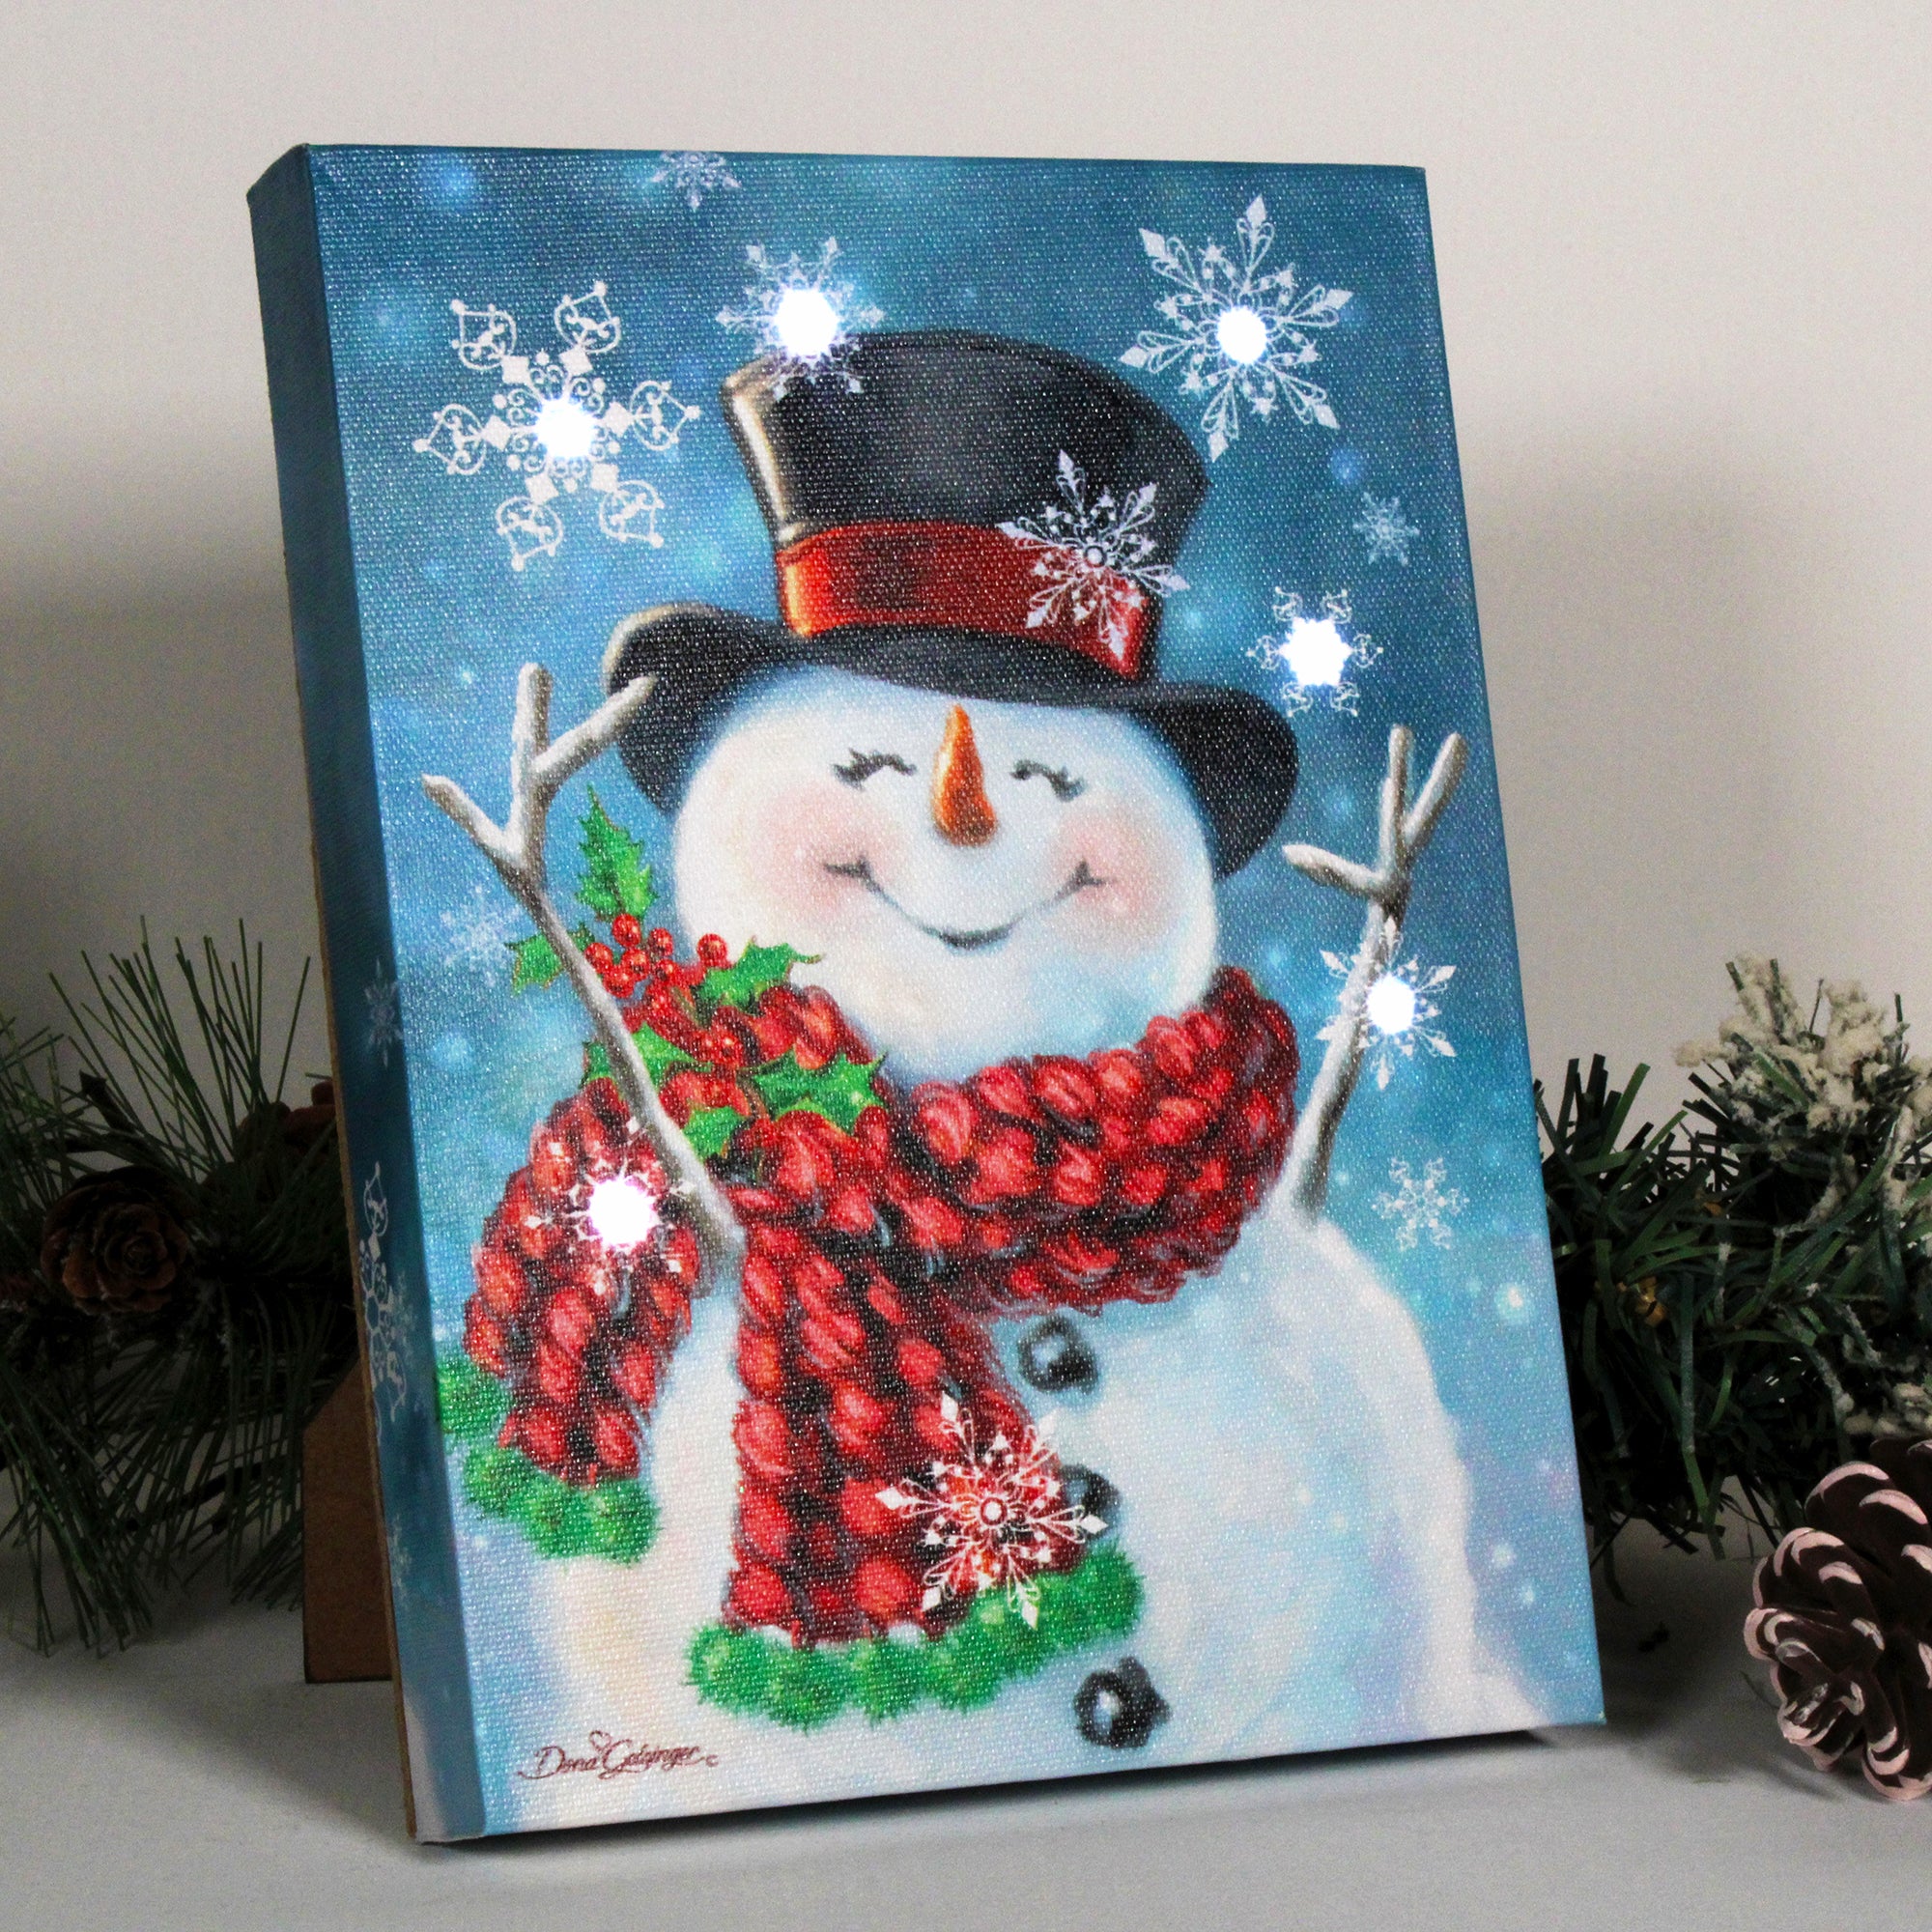 This delightful canvas features a happy snowman with its wooden arms raised in pure joy. Wrapped in a cozy scarf adorned with holly, this snowman is ready to spread some festive cheer.